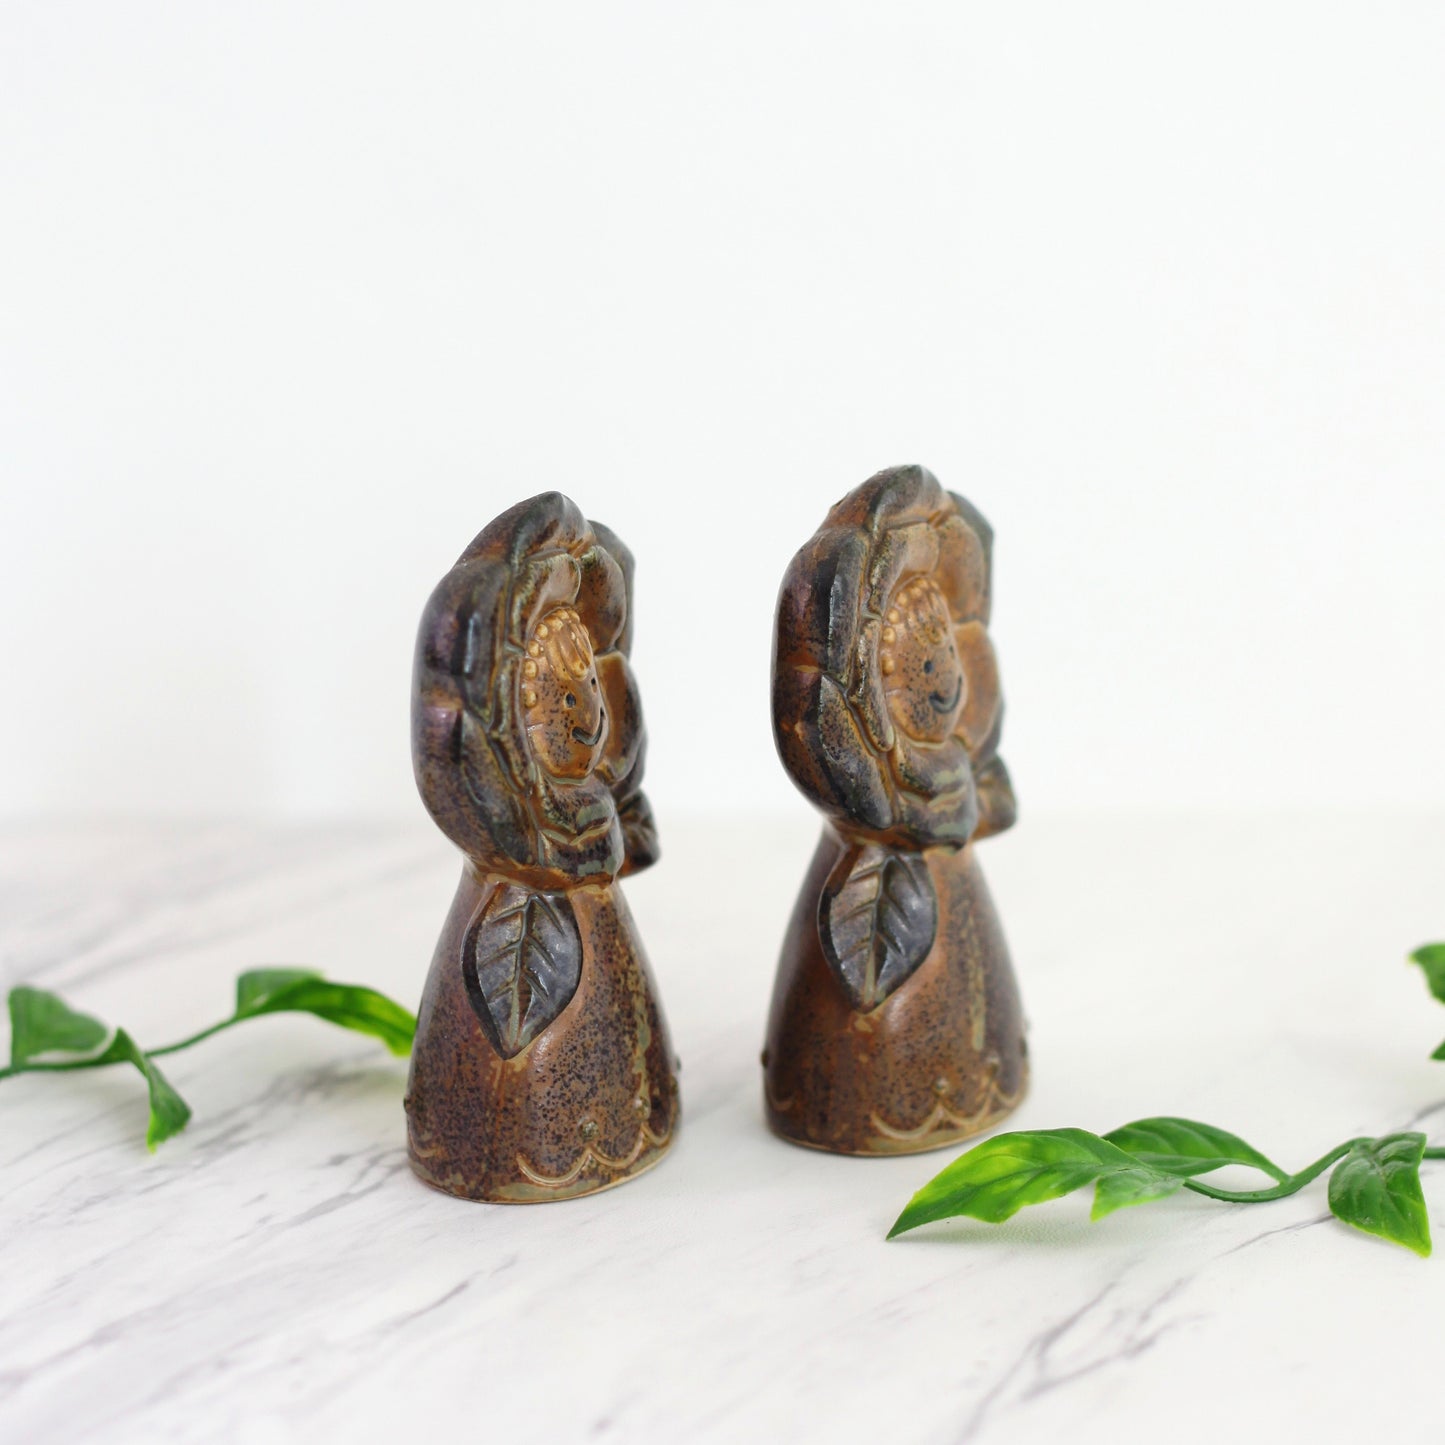 SOLD - Vintage Stoneware Flower Faces Salt and Pepper Shakers